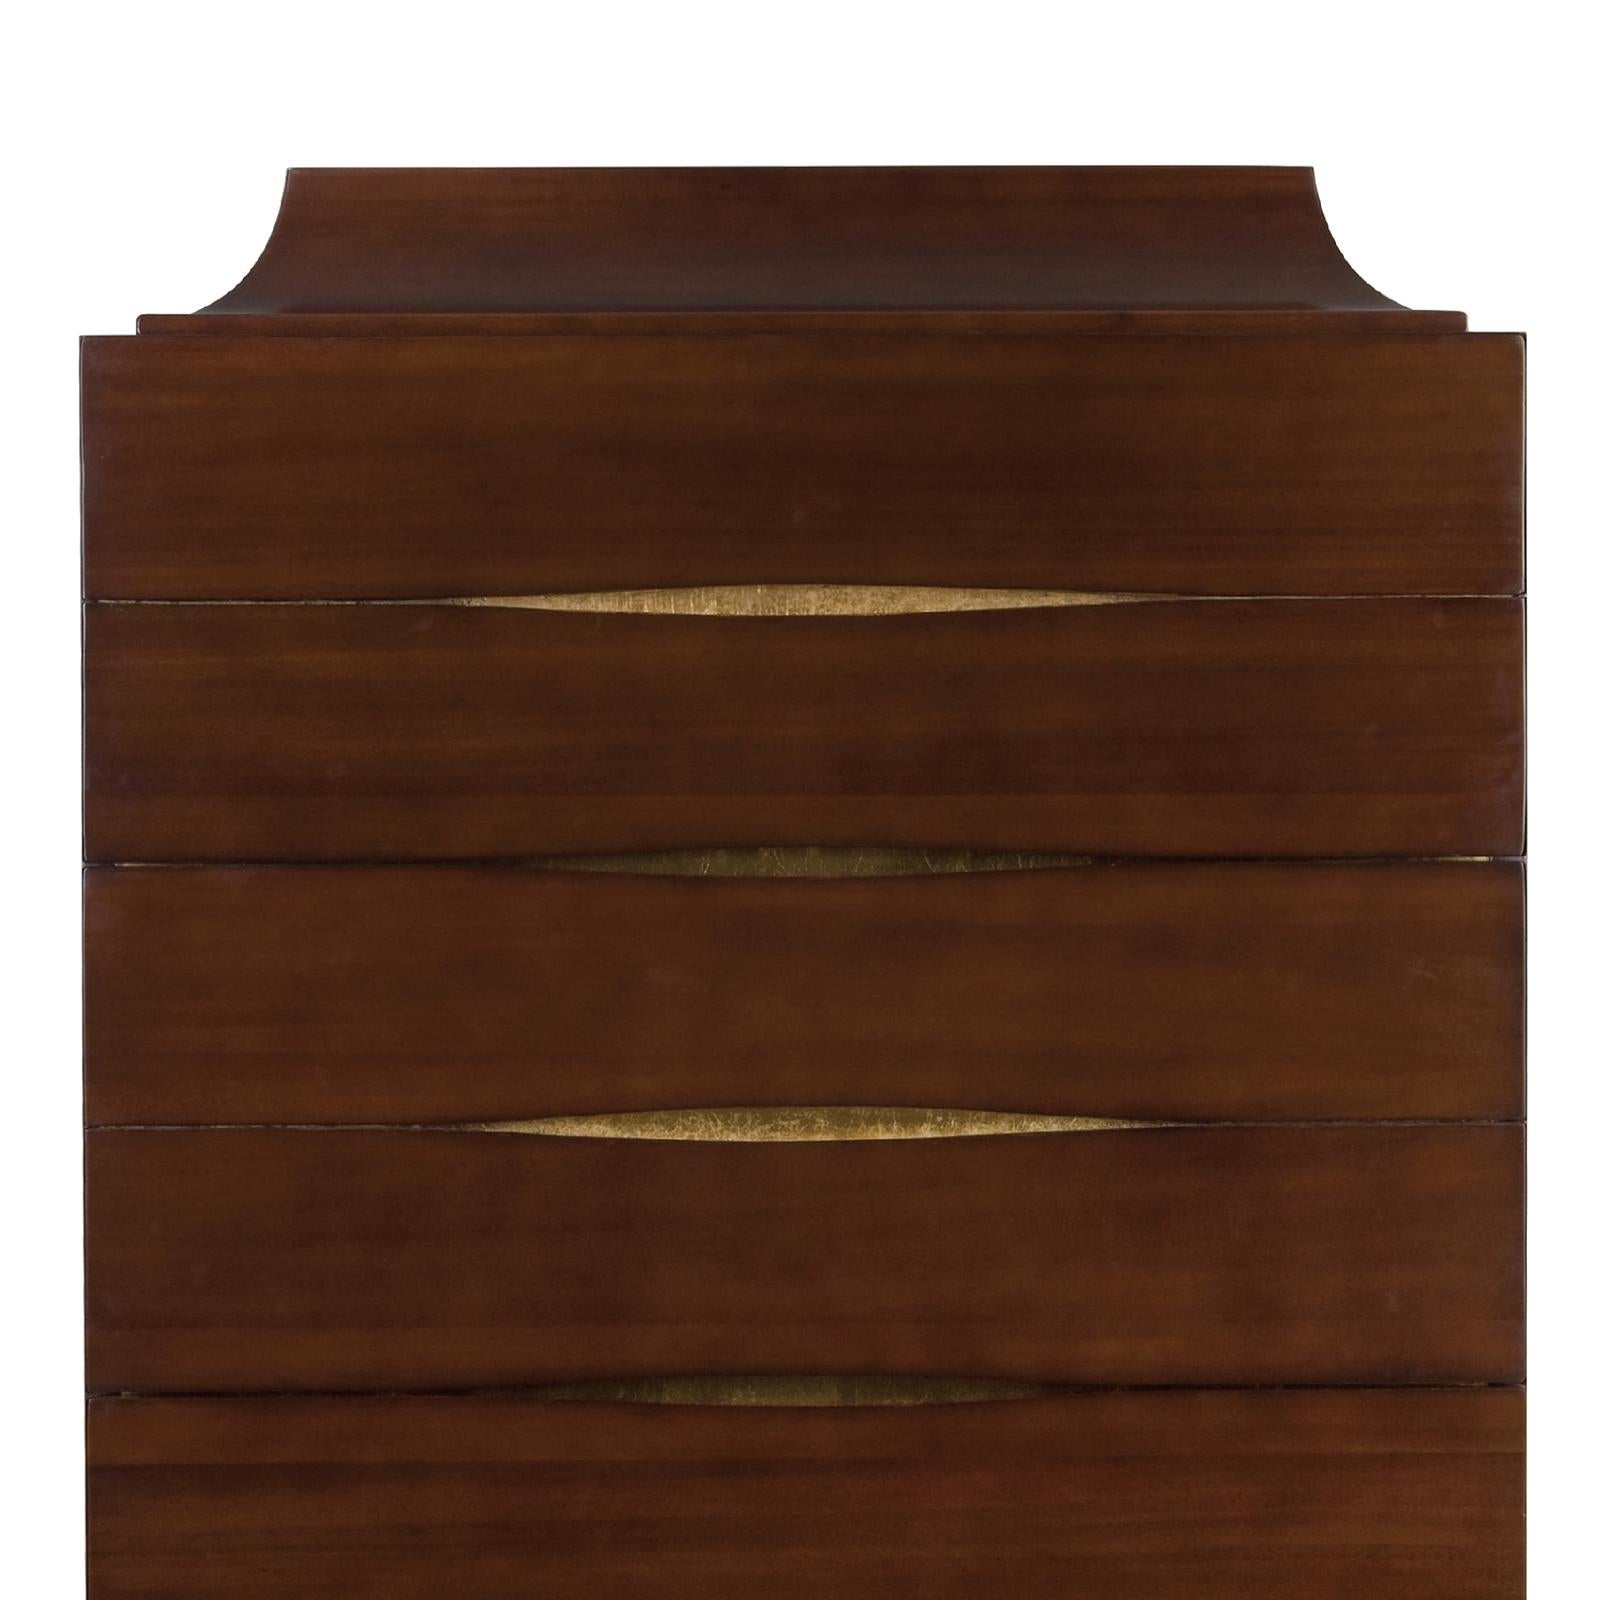 Chest of drawers silky all in solid mahogany wood,
in tobacco finish and with four drawers. With hand-painted 
antique gold touch on drawers. Hand-carved piece with 
4 saber feet.
  